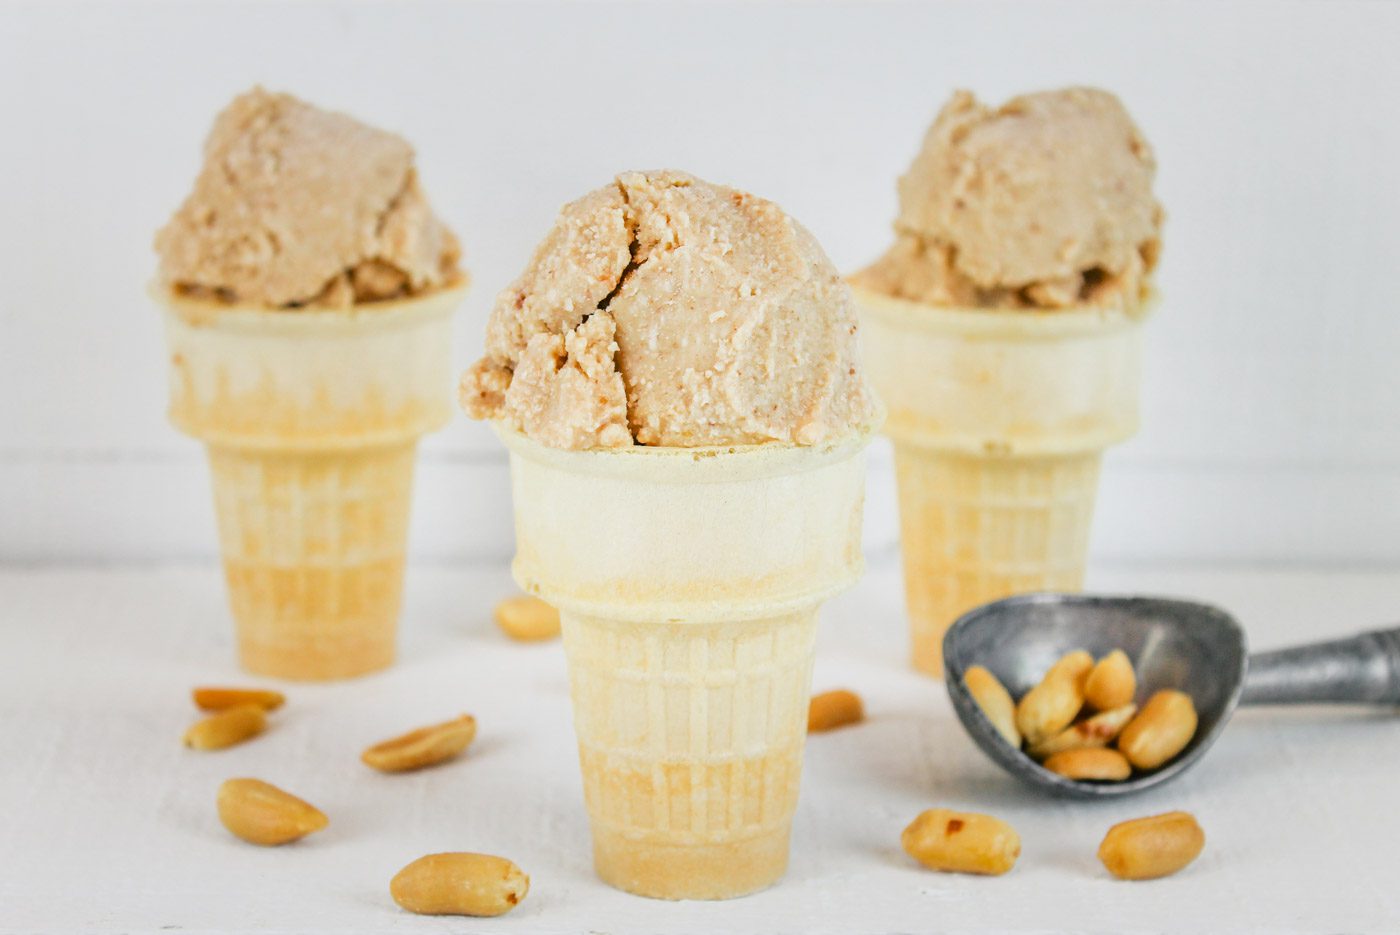 Peanut Butter Ice Cream Sweetened With Dates